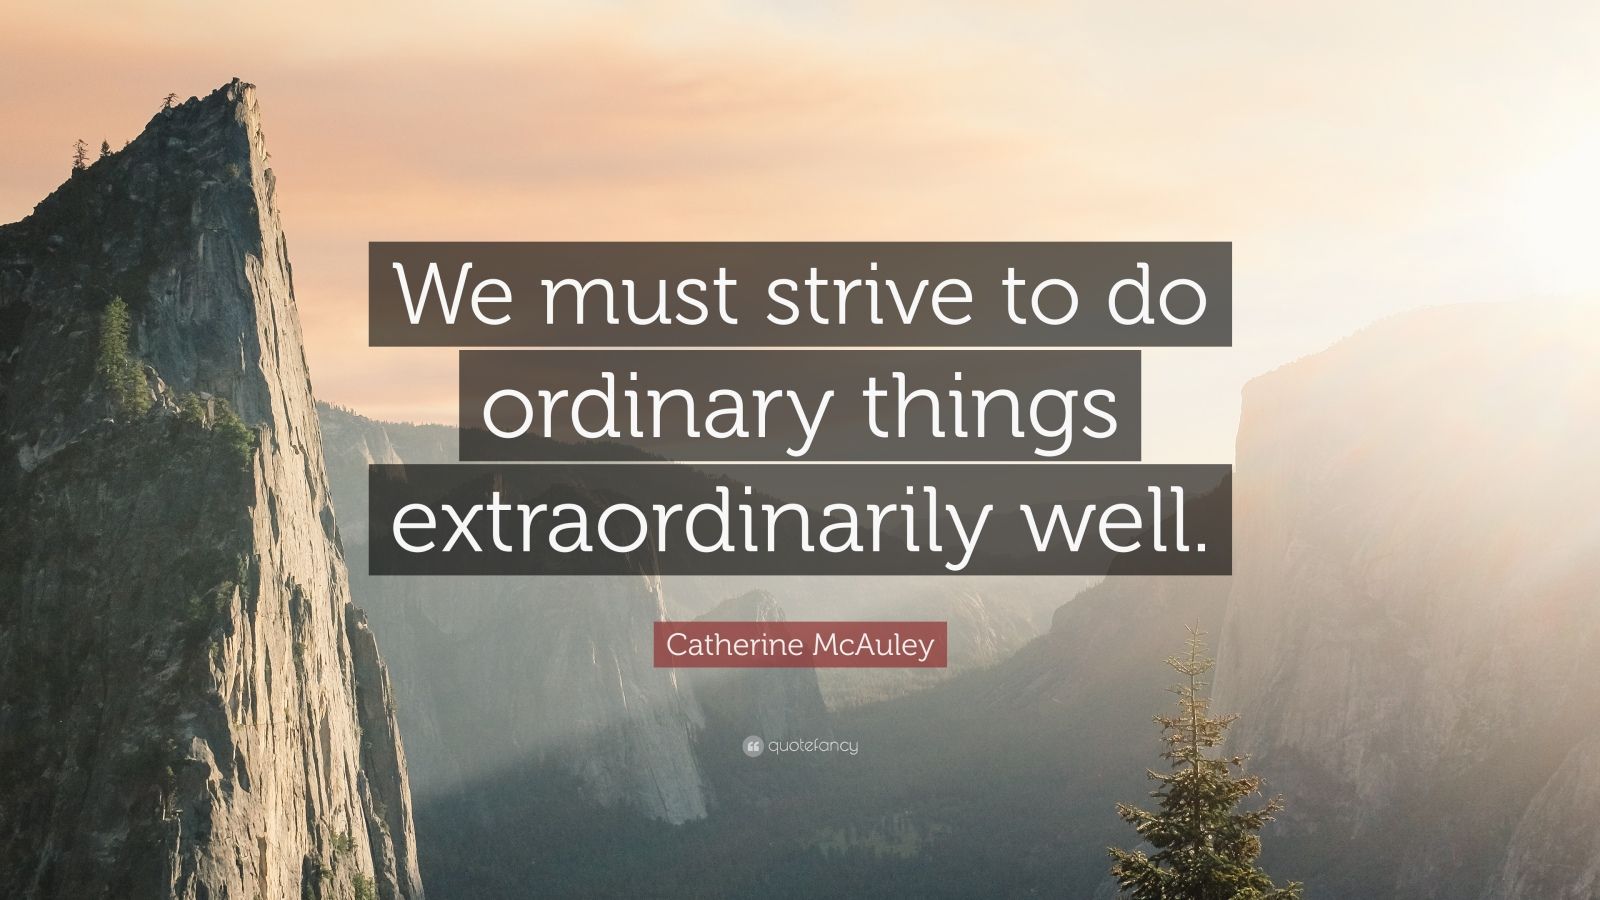 Top 20 Catherine McAuley Quotes of All Time (2021 Update) - Quotefancy